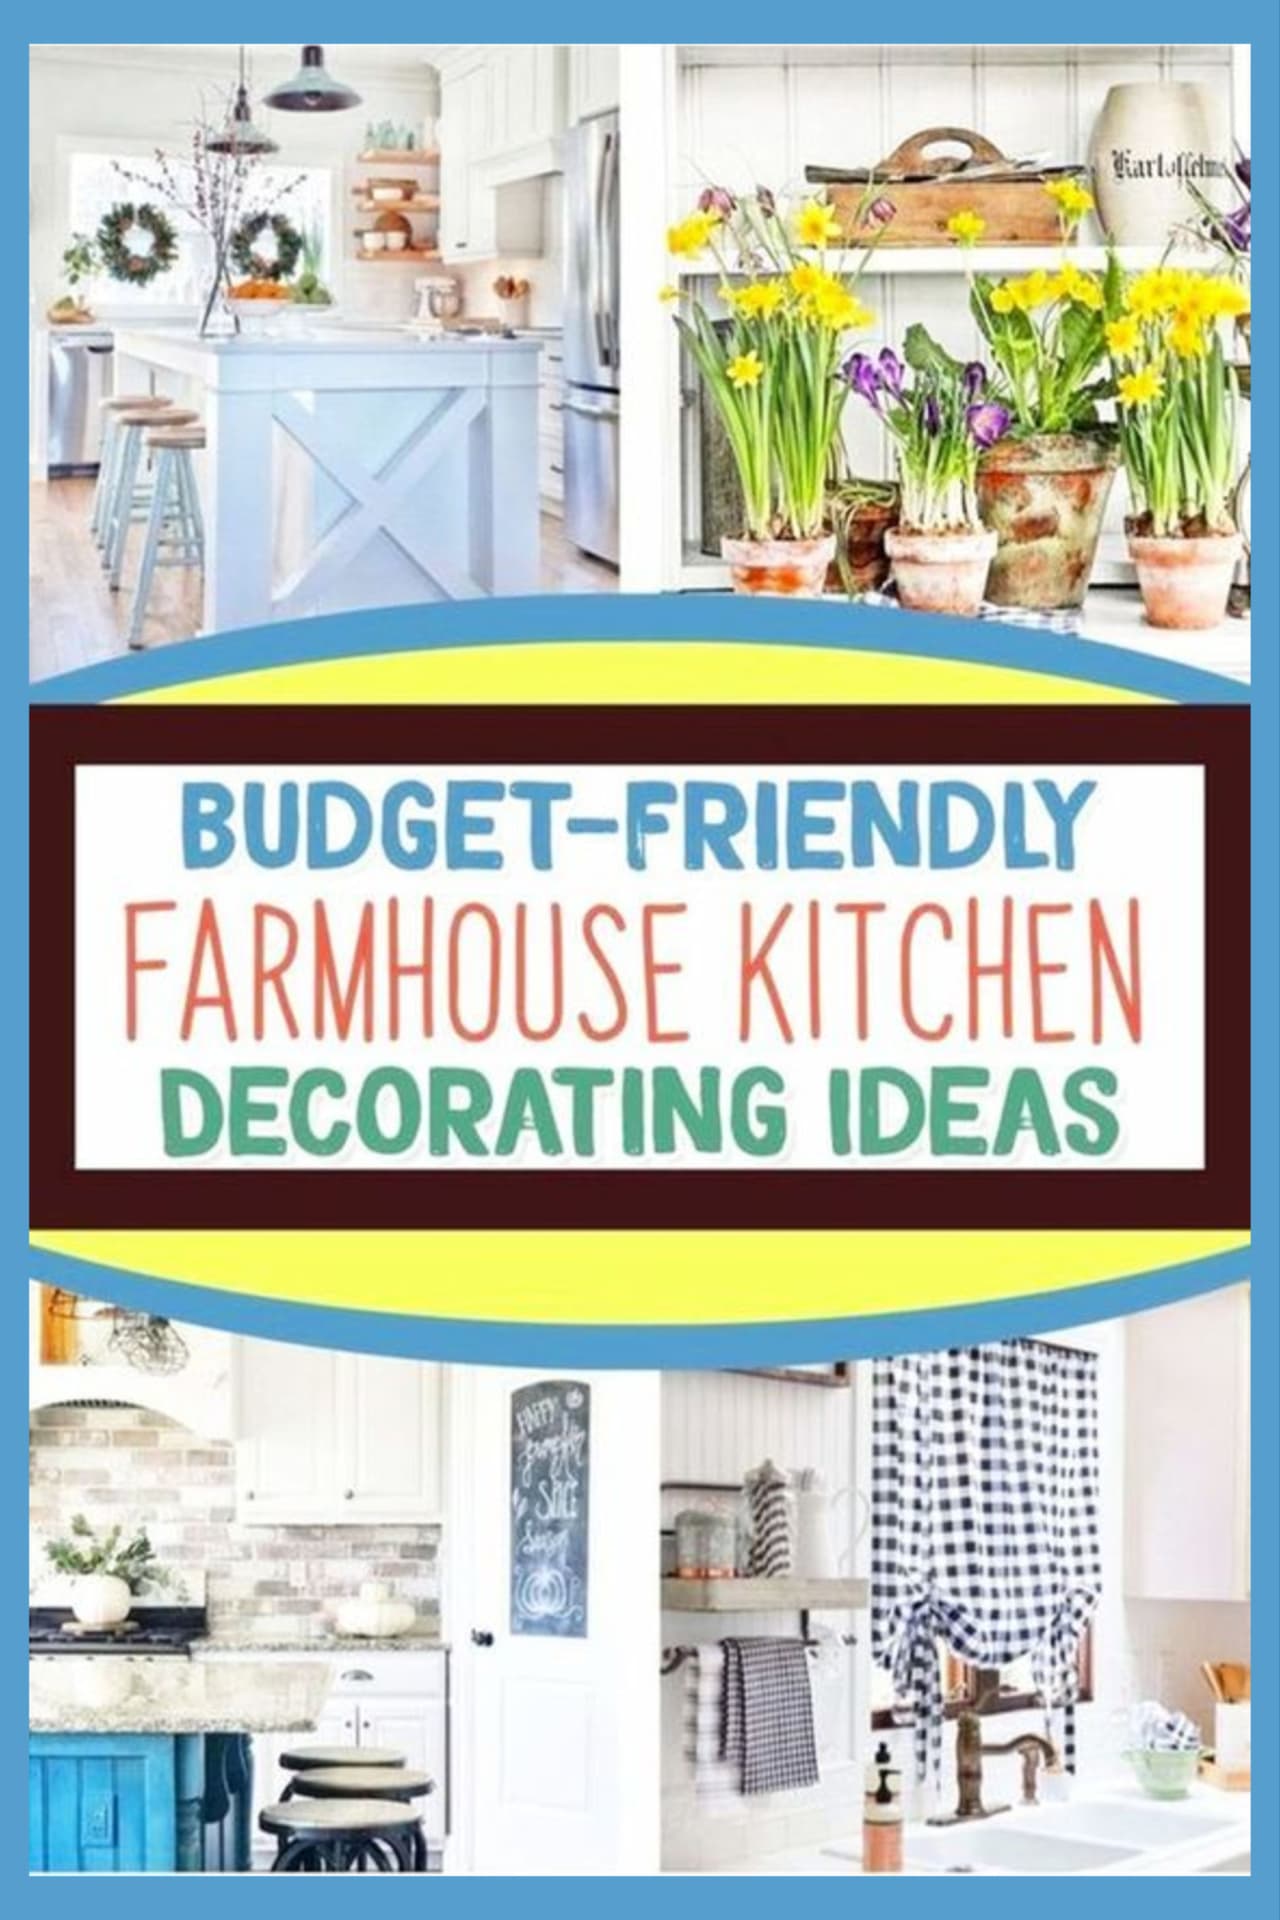 Farmhouse Kitchens! Affordable farmhouse kitchen decor ideas on a budget - cheap and budget-friendly ways to decorate a farmhouse kitchen or country living cottage kitchen in your house on a budget